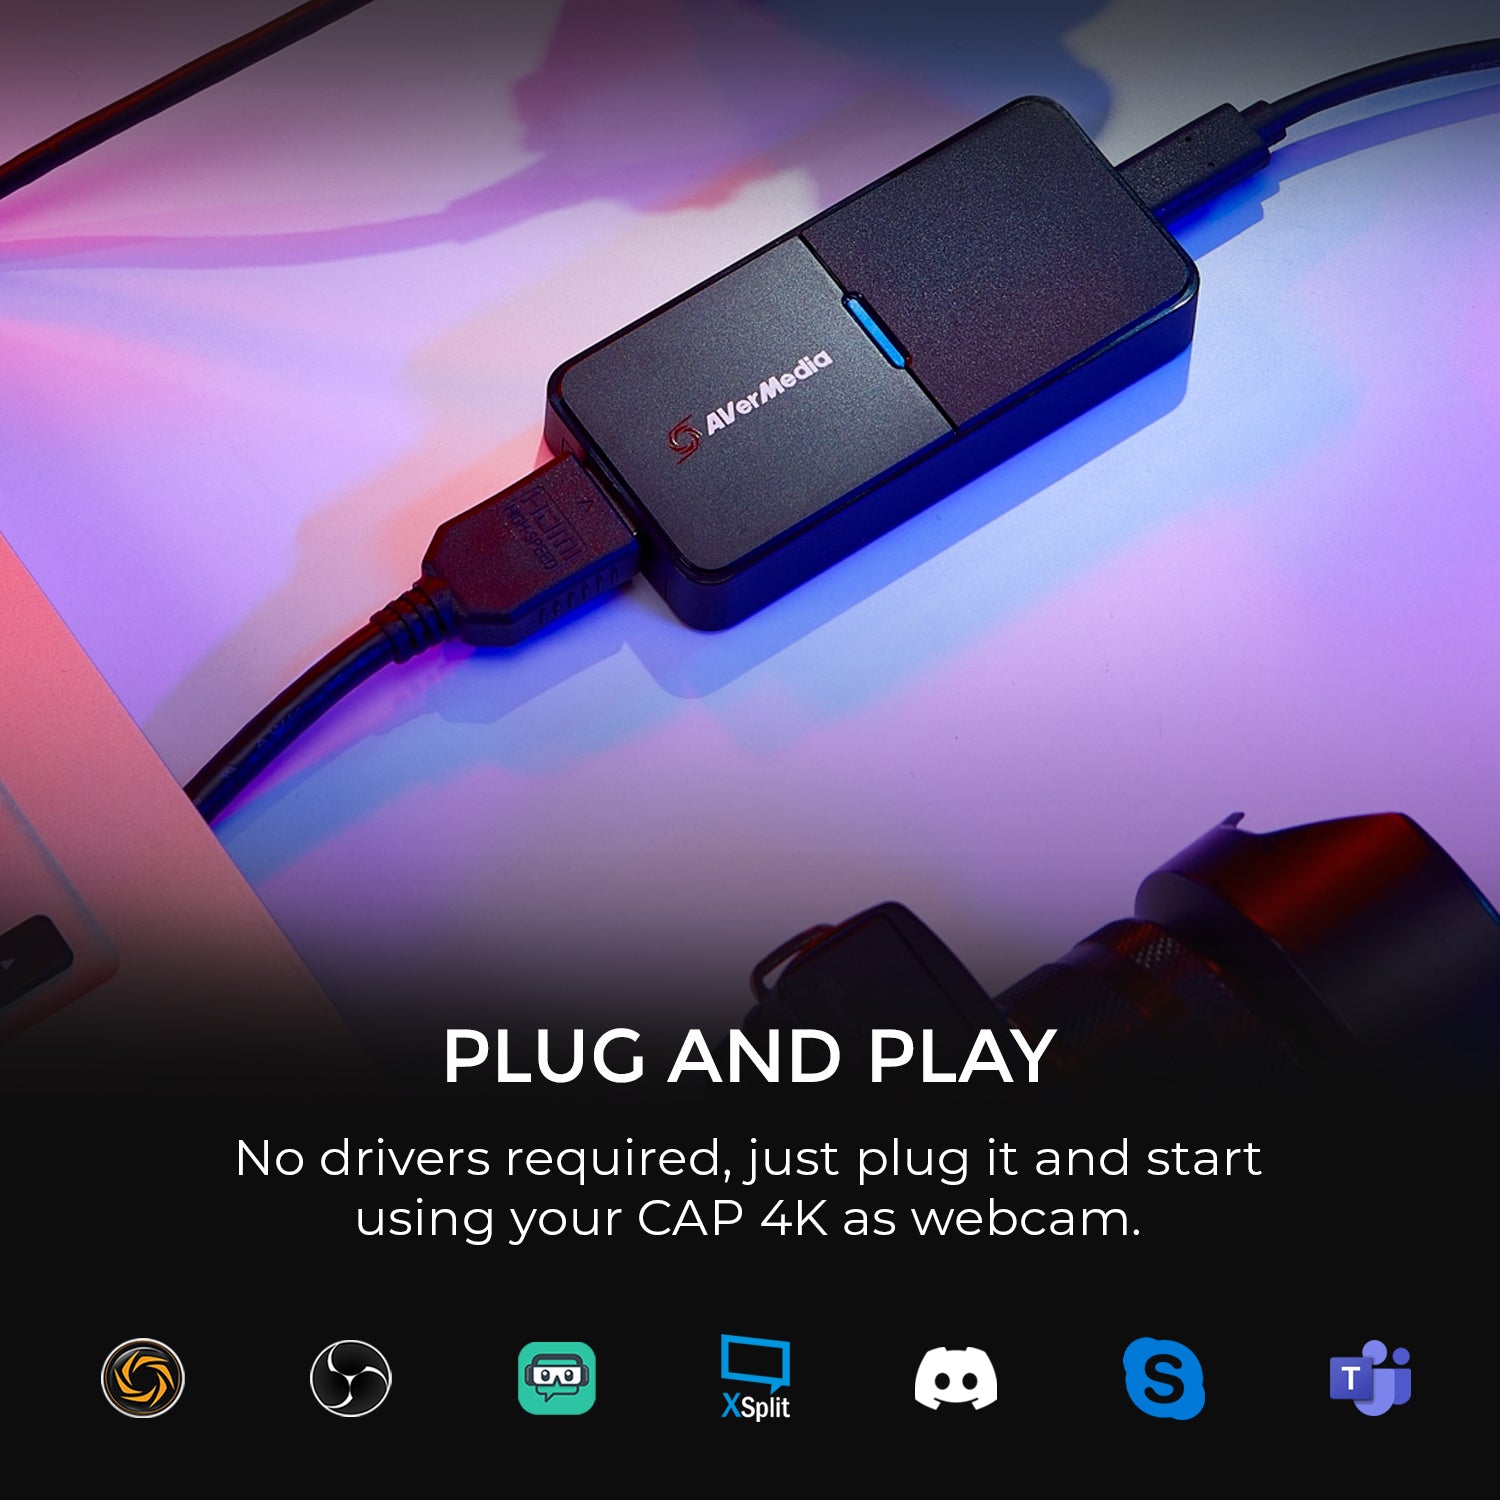 BU113 capture card easy connected with HDMI and USB cables